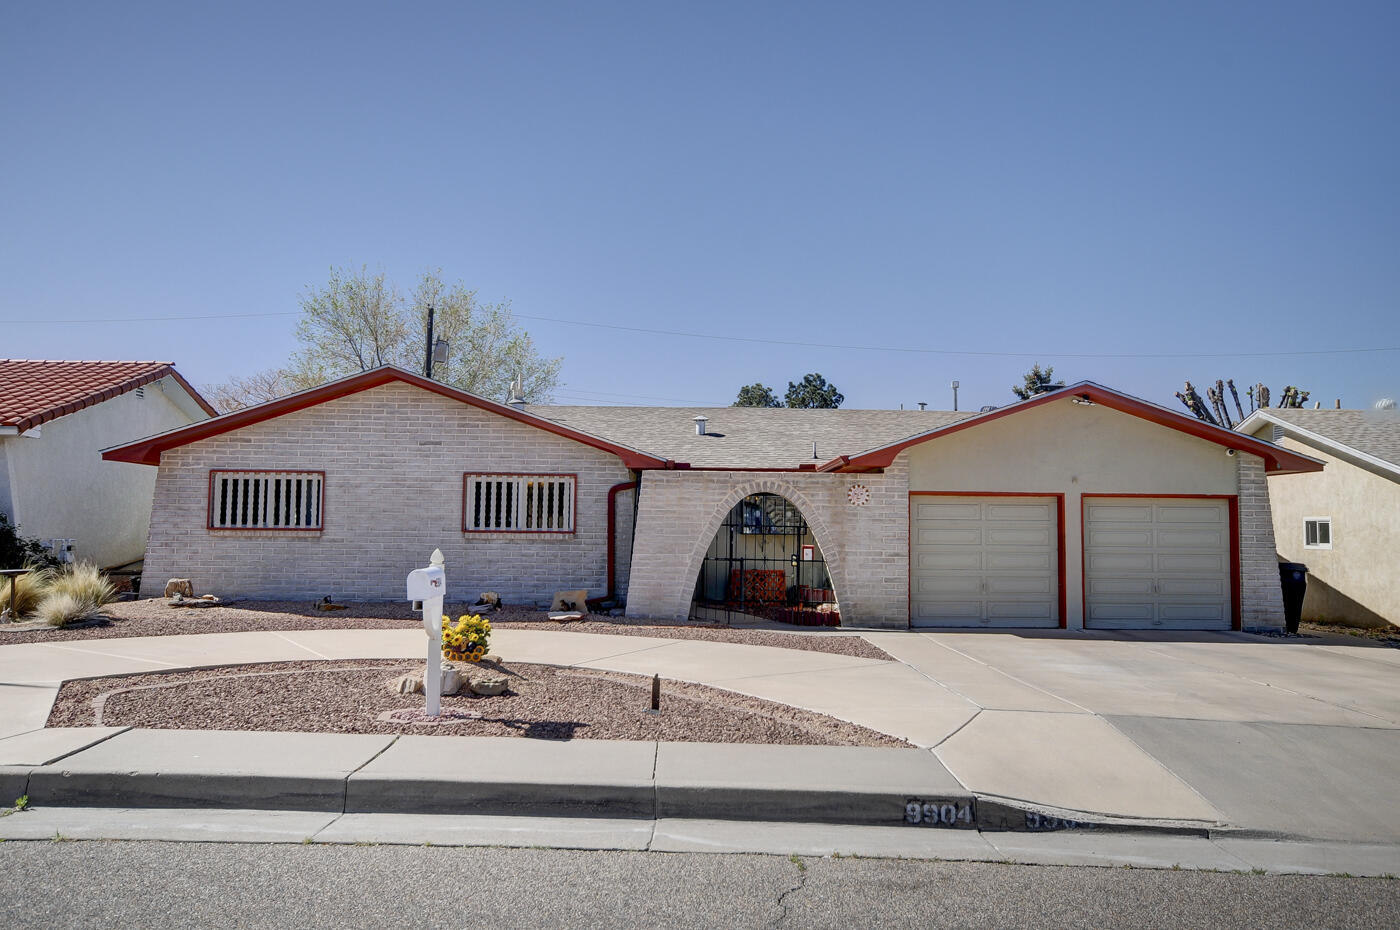 9904 Dorothy Place NE, Albuquerque, New Mexico 87111, 3 Bedrooms Bedrooms, ,2 BathroomsBathrooms,Residential,For Sale,9904 Dorothy Place NE,1061373